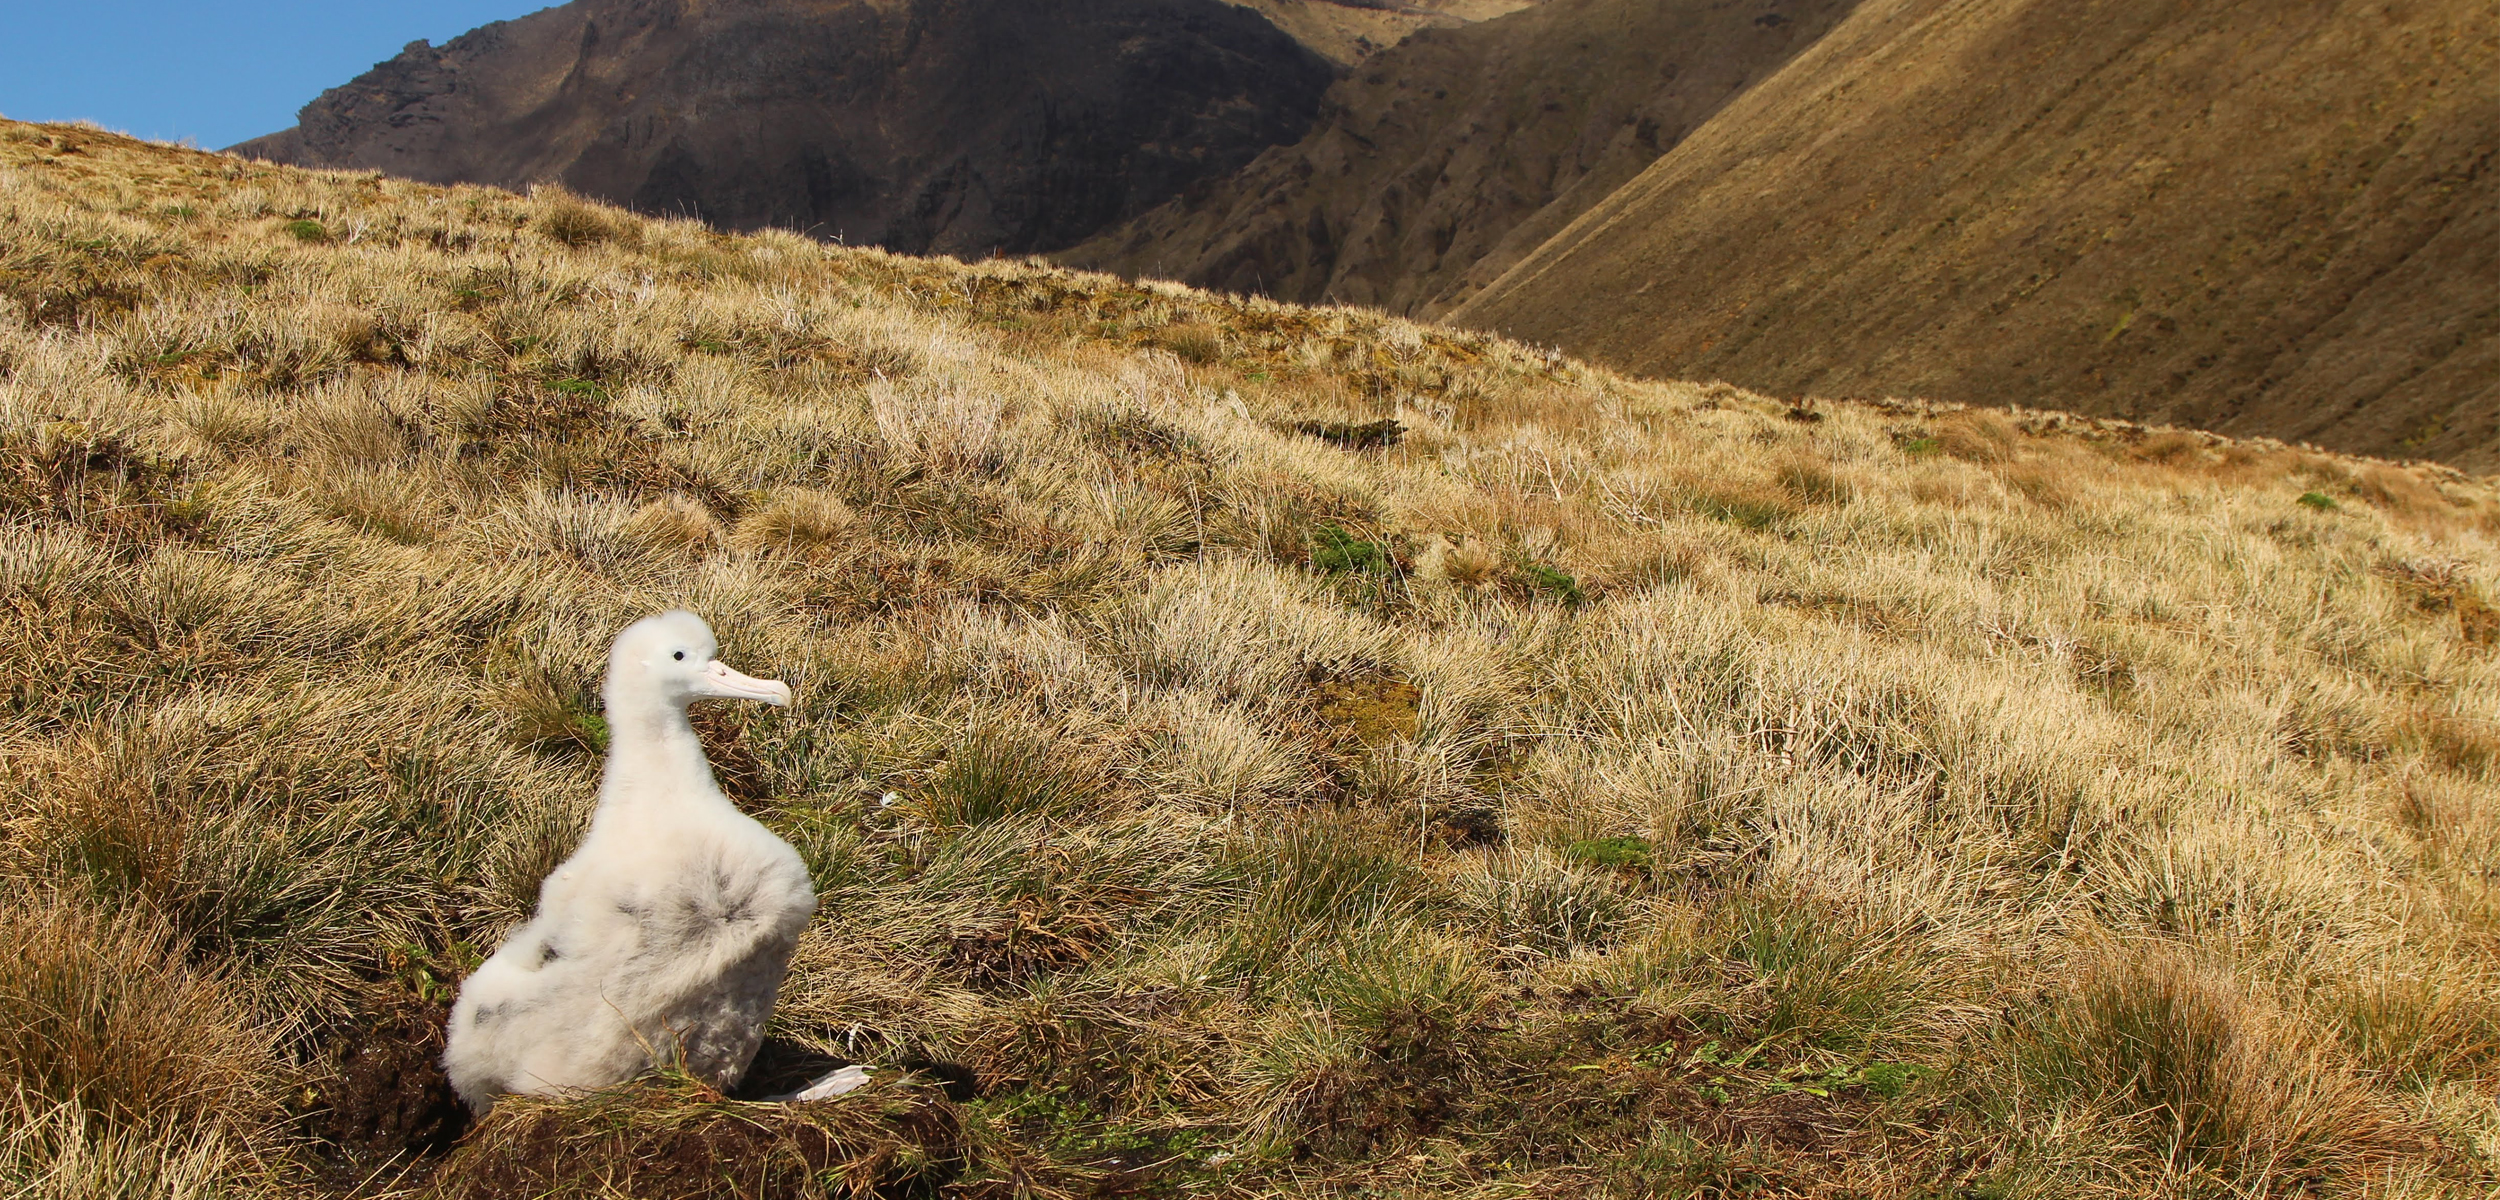 A fluffy white albatross chick sits in the bottom left corner in yellow dry grass with dark brown mountains in the background